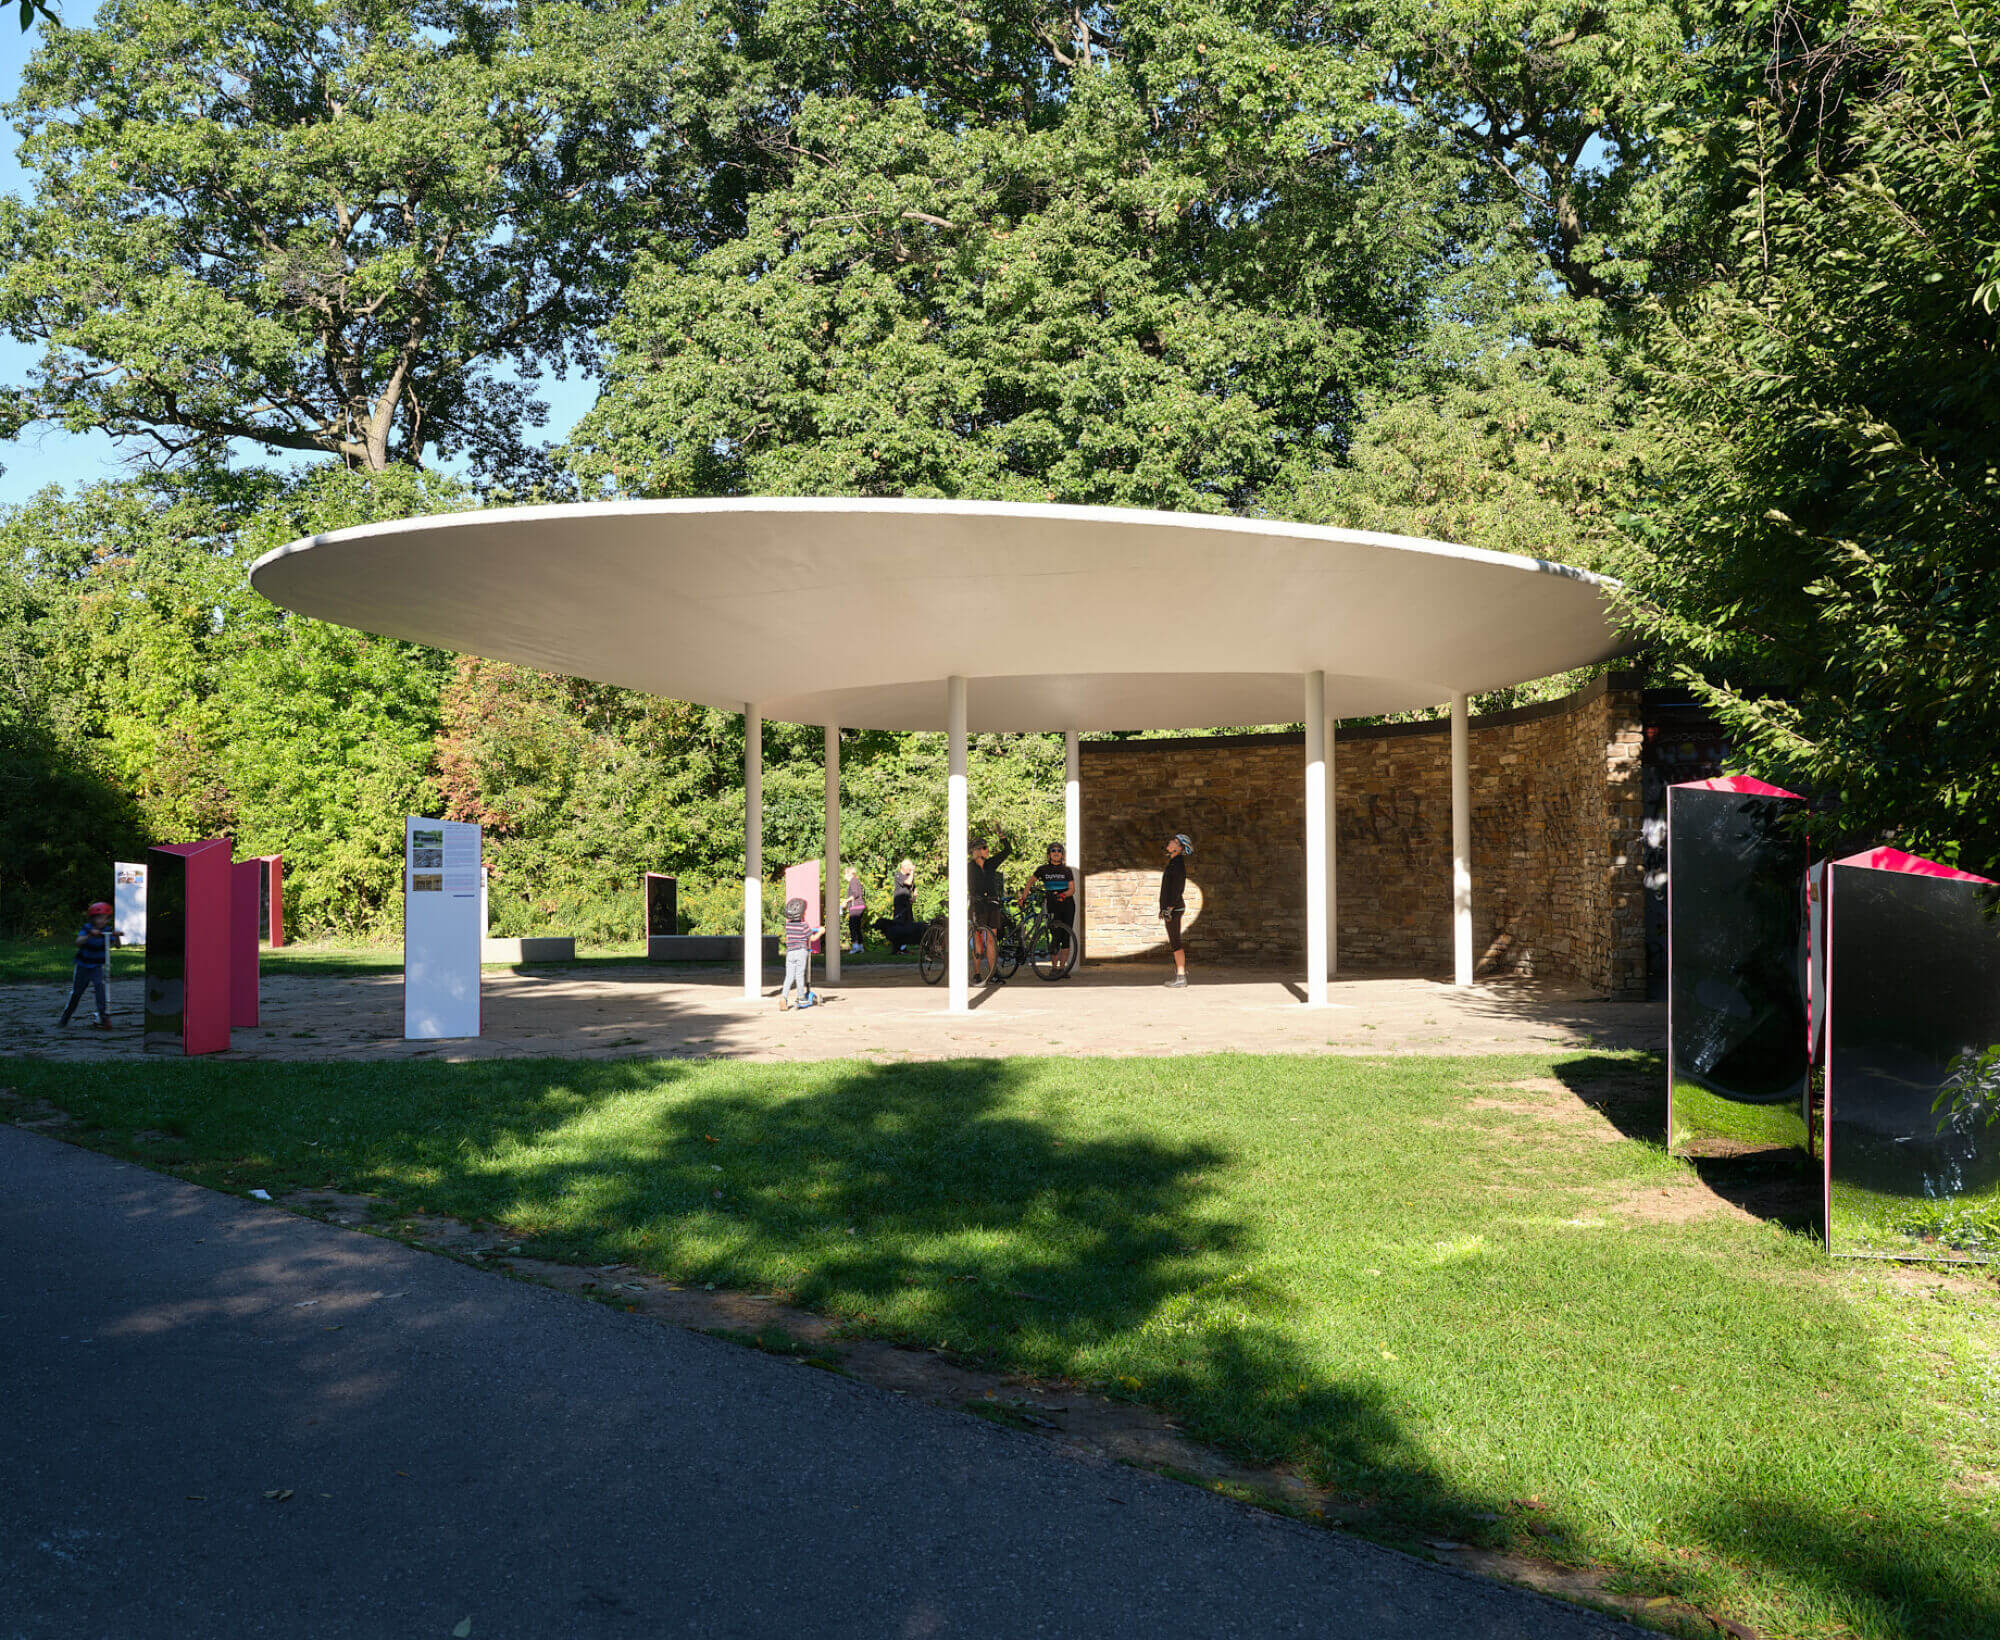 A large circular structure in a park. The structure is held up by polls. Behind the structure is a curved brick wall. A variety of heritage plaques and reflective posts cover the space around the structure.